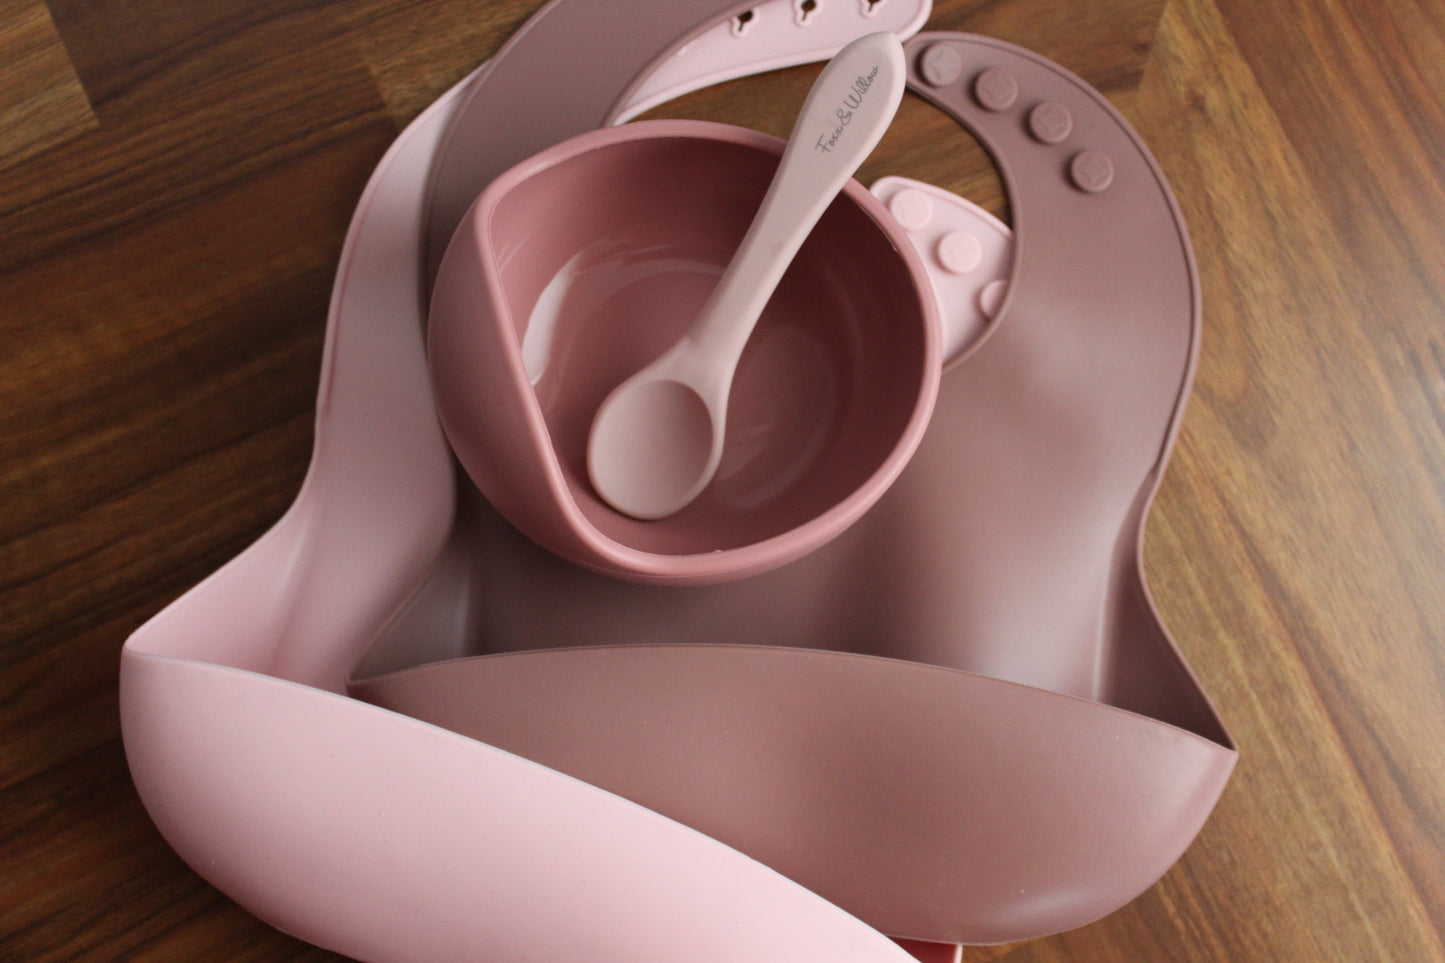 All Silicone Spoon